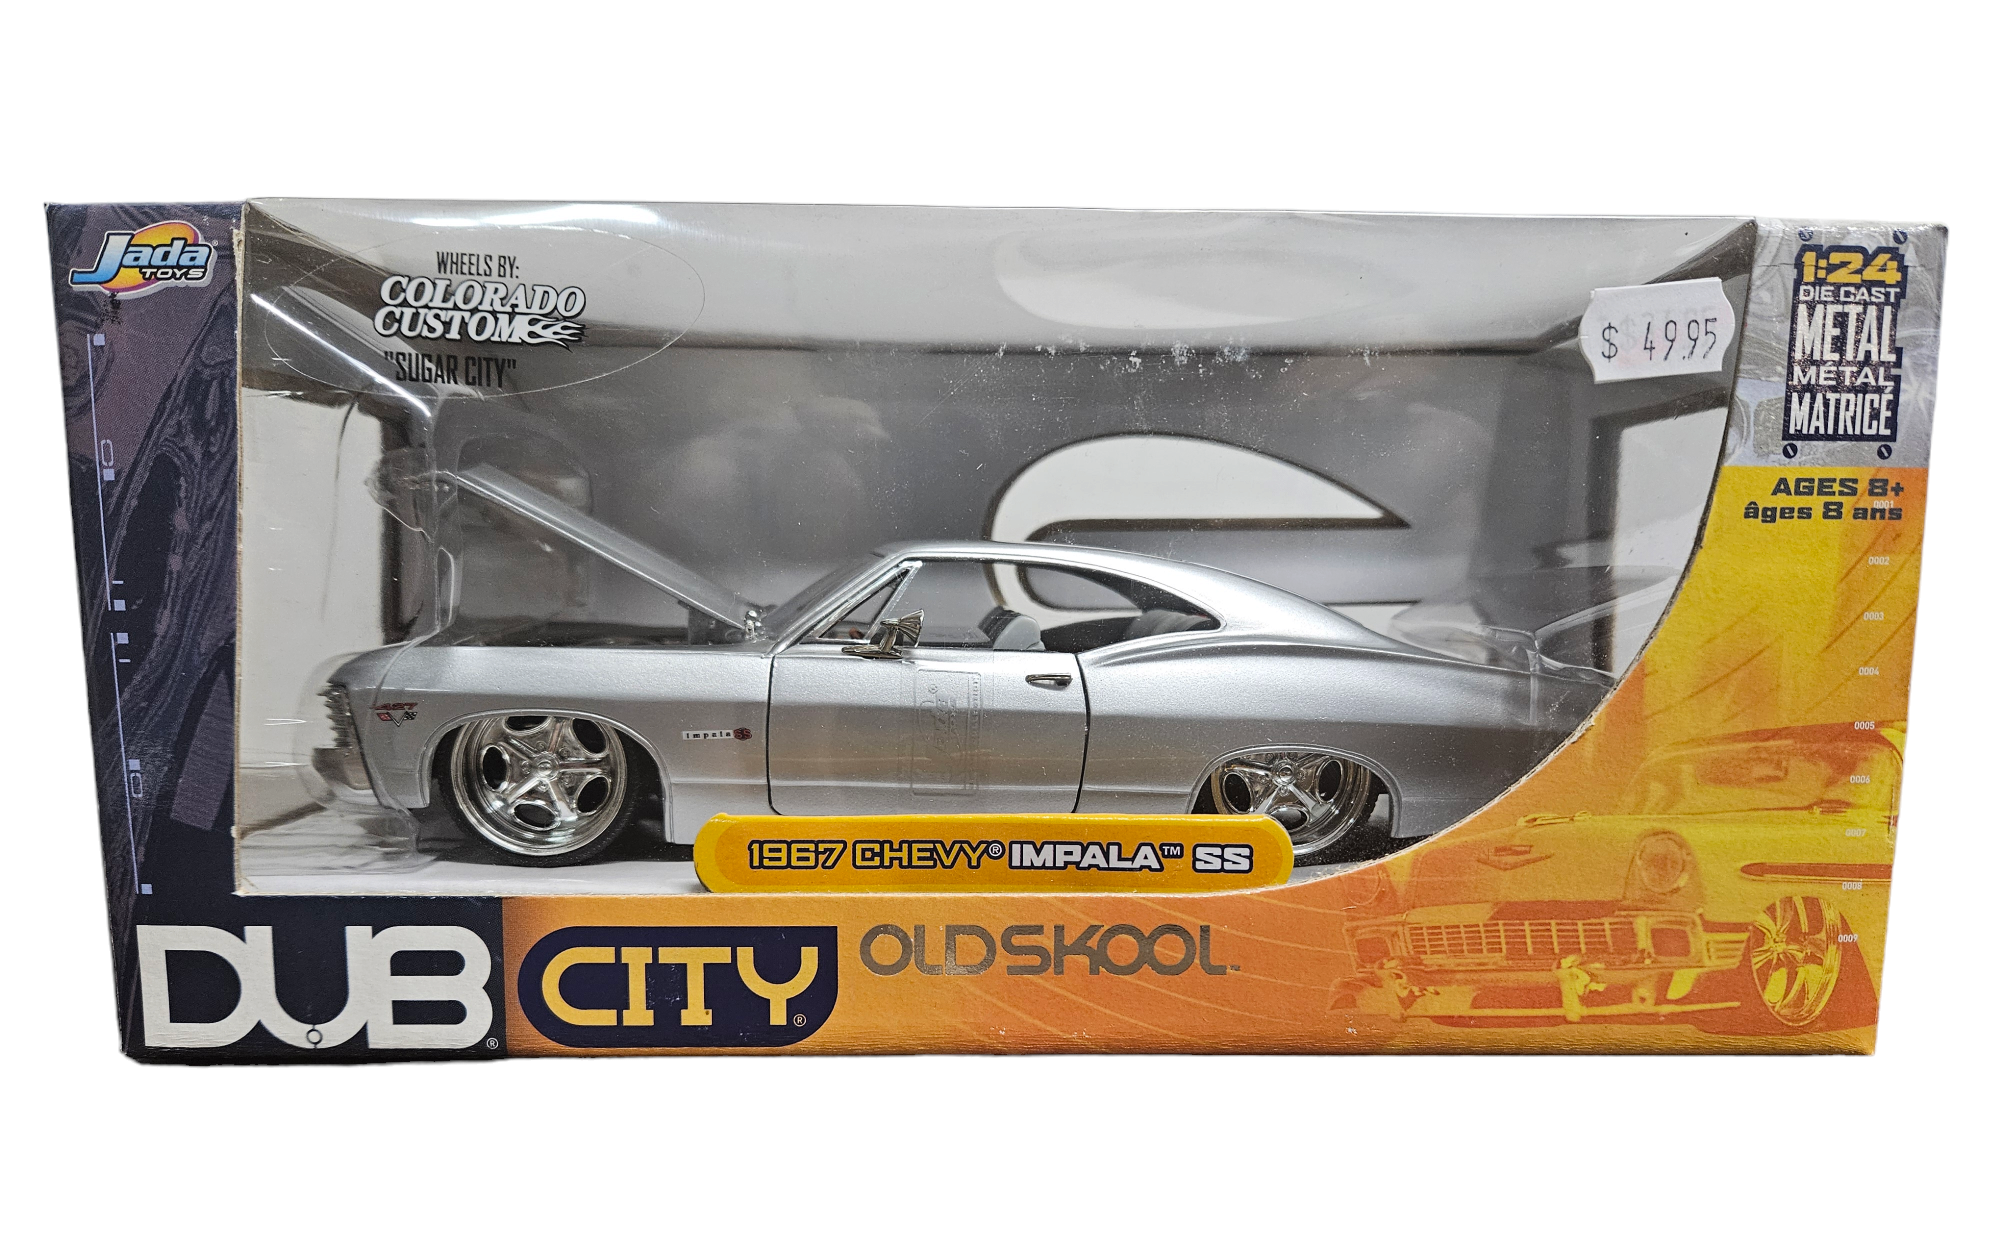 1967 CHEVROLET IMPALA SS, SILVER in 1:24